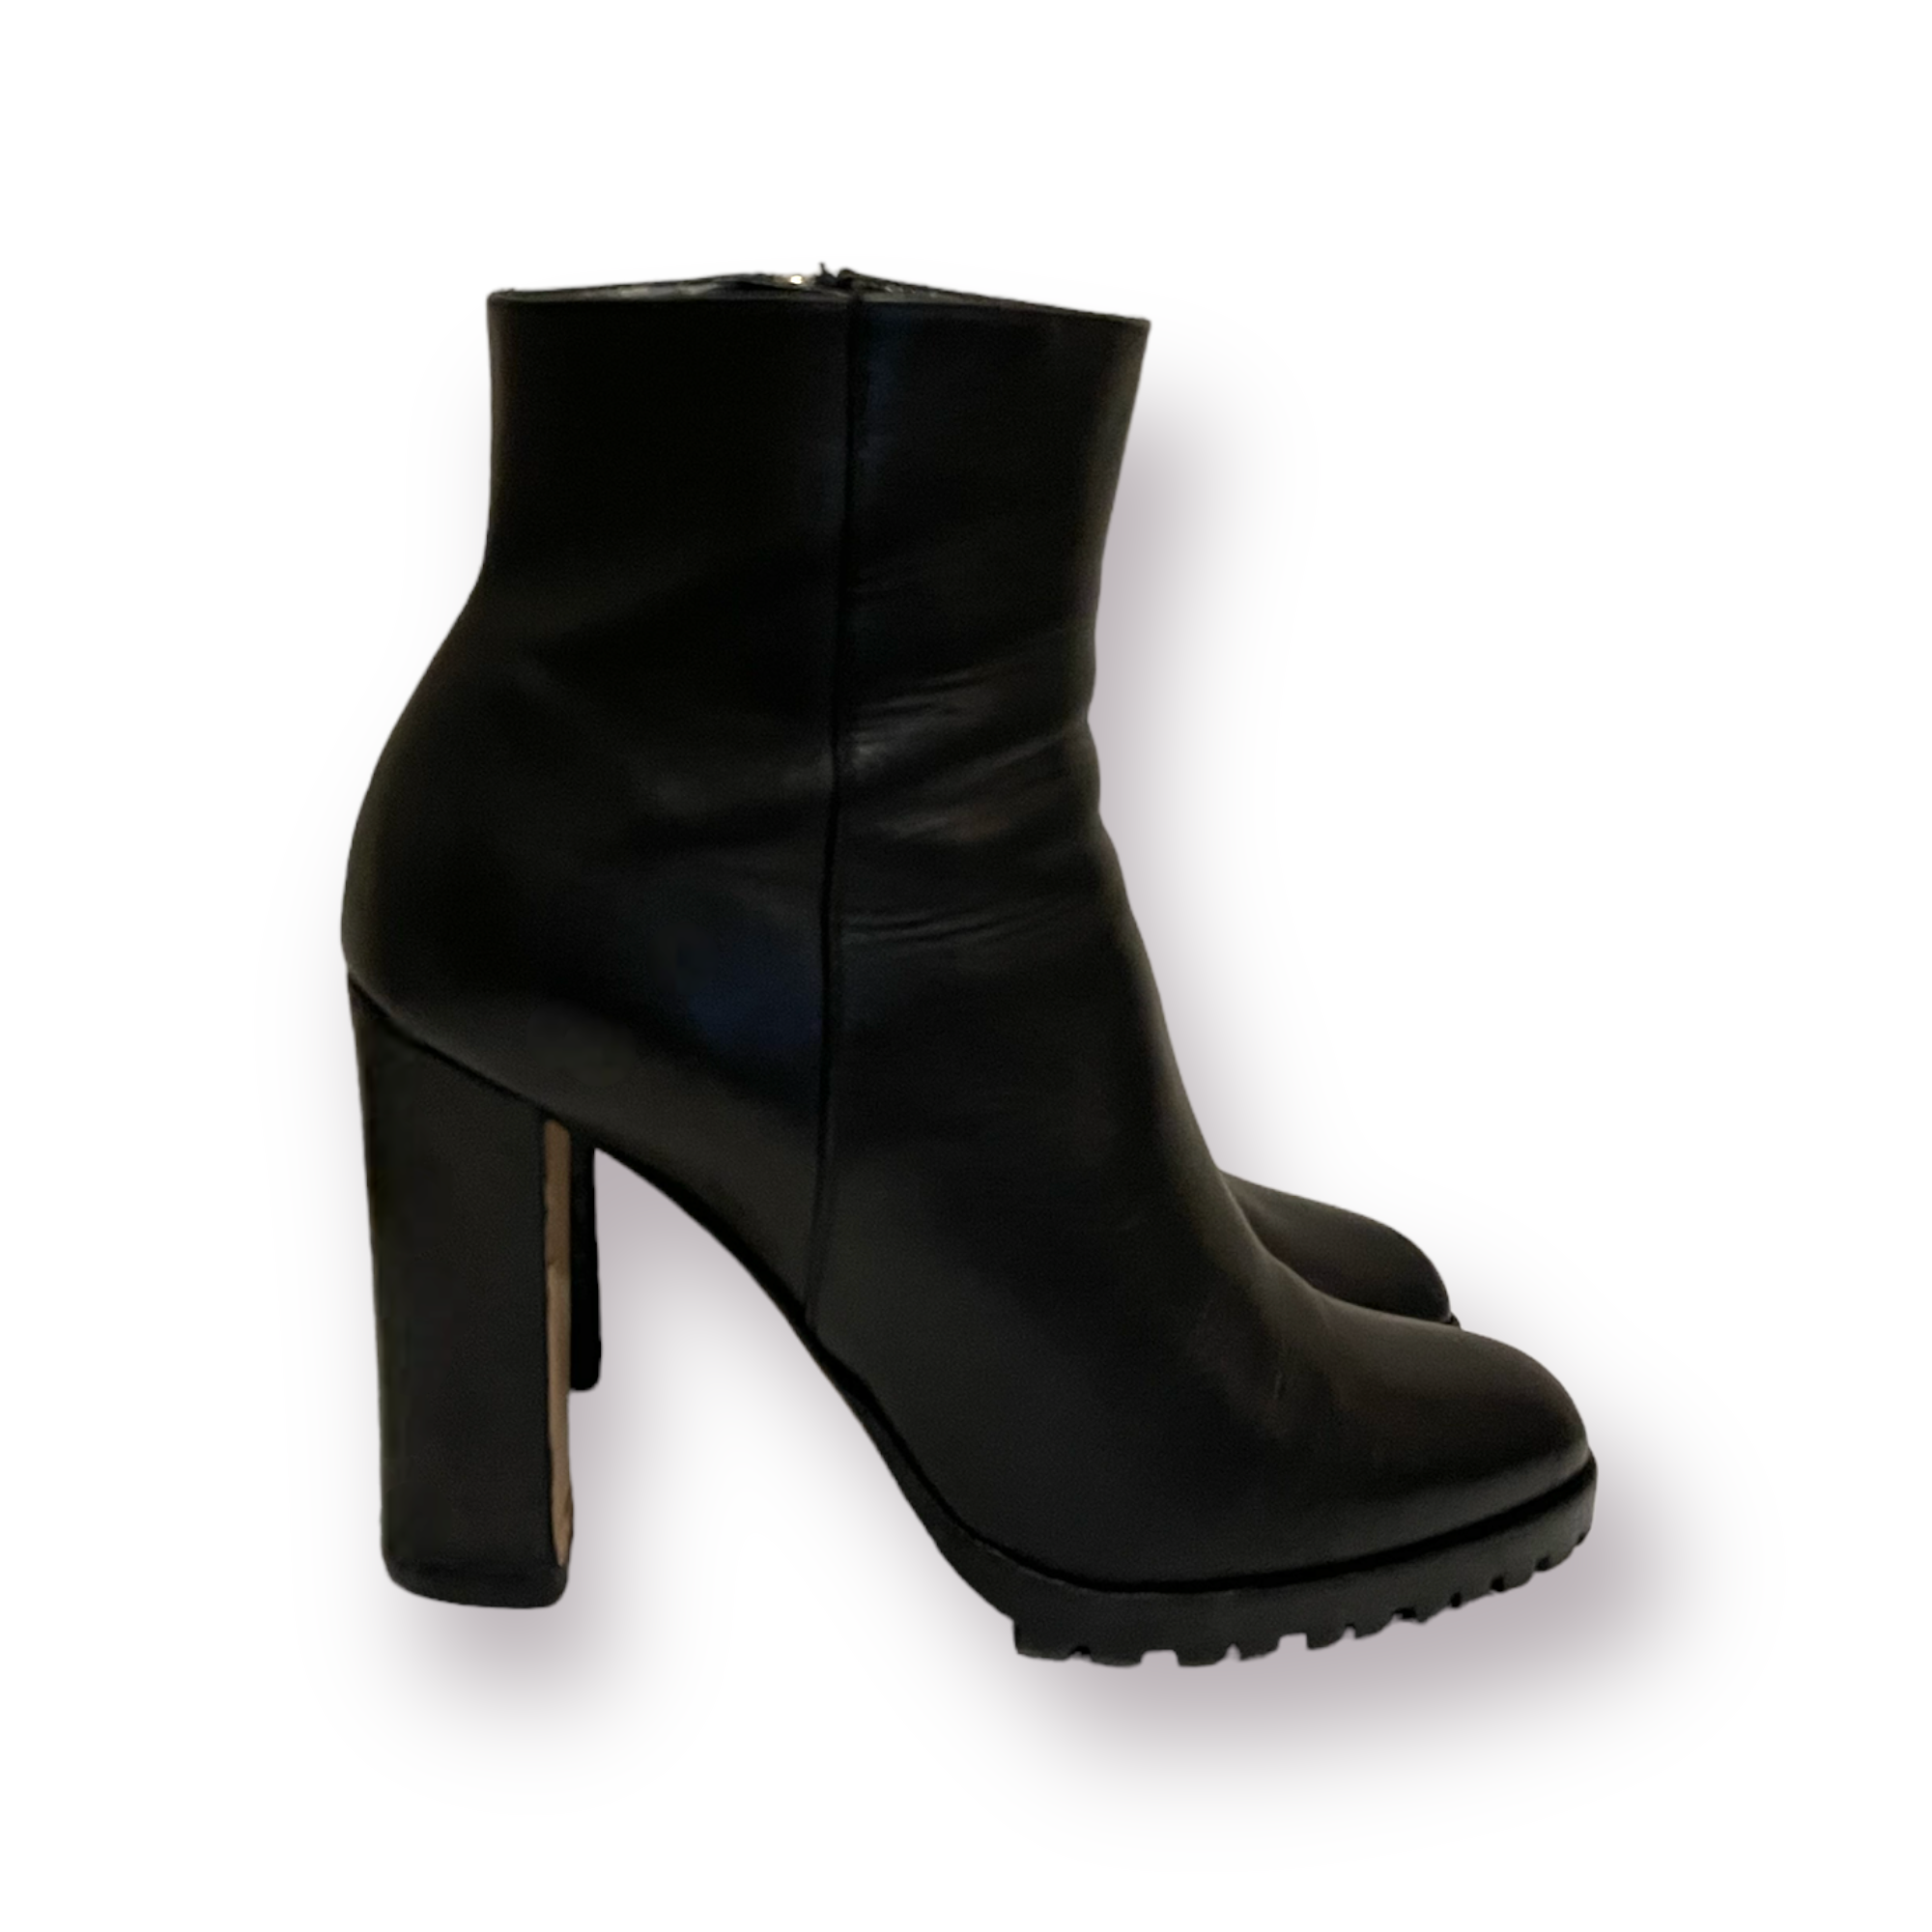 Gianvito Rossi Black Leather Ankle Boots |Size: 38.5|